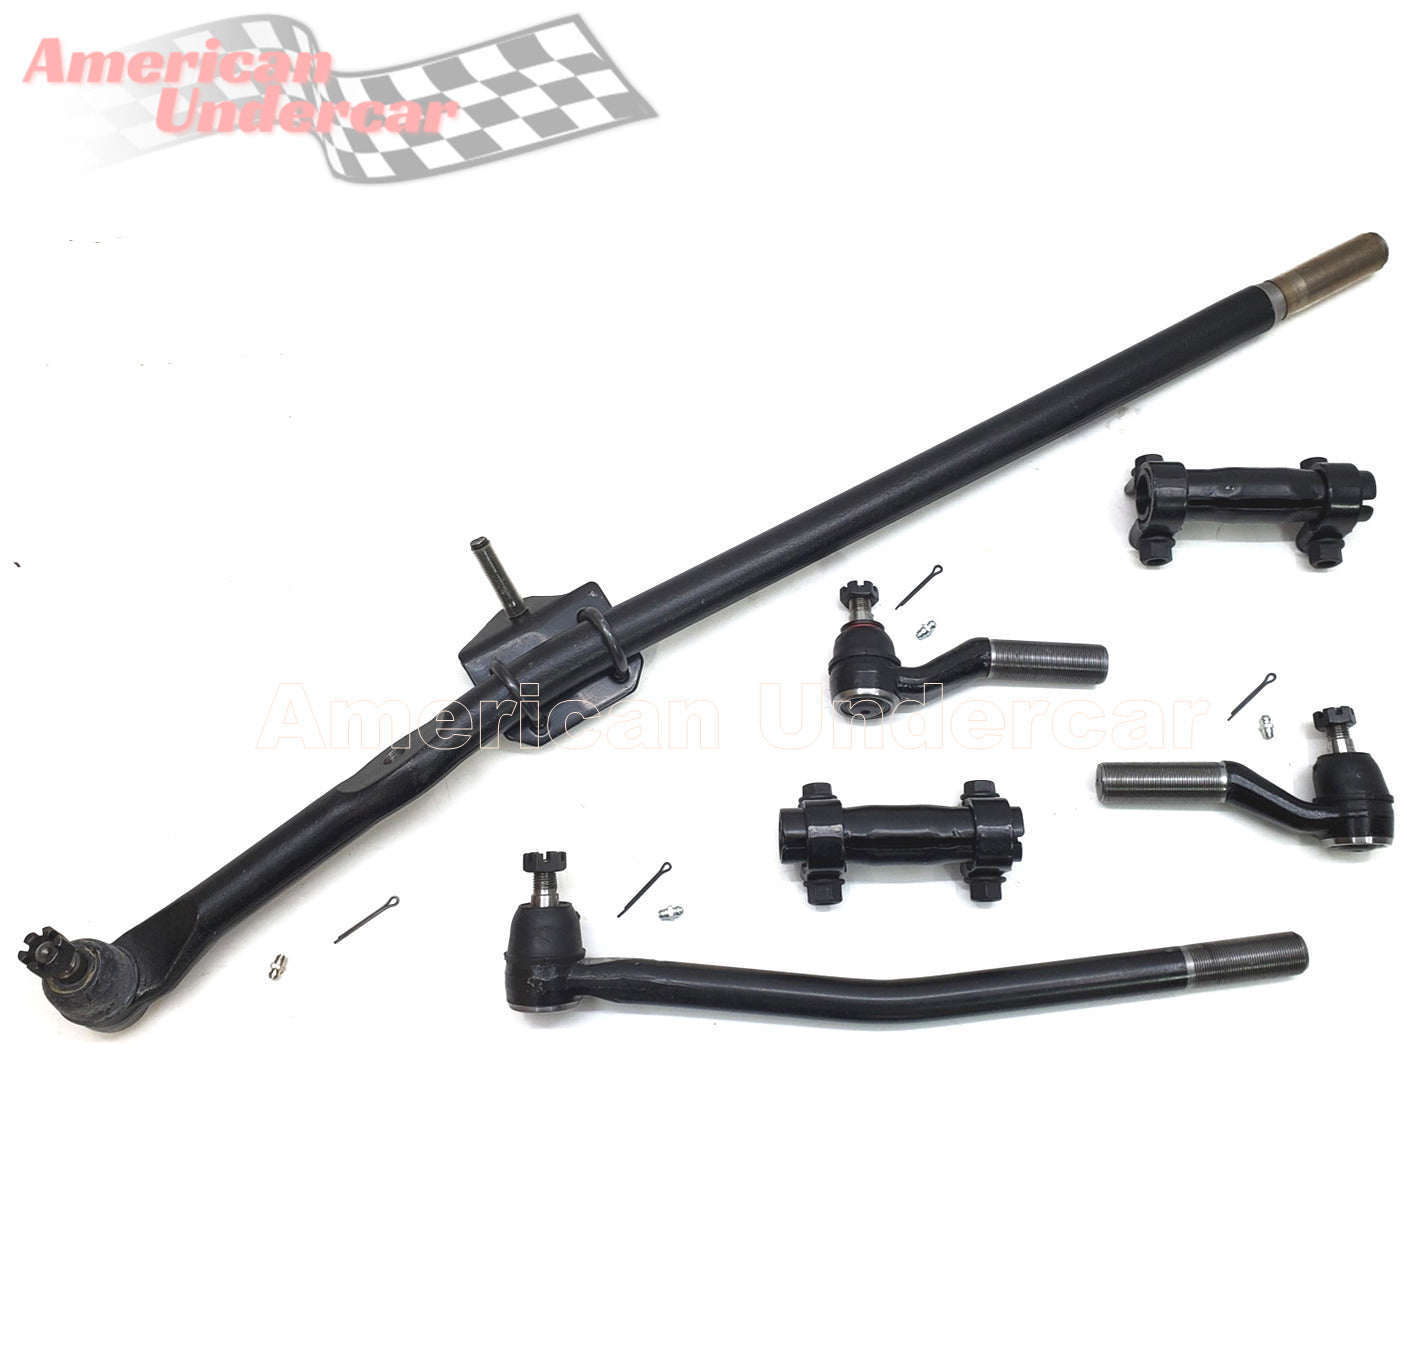 HD Drag Link Tie Rod Sleeve Steering Suspension Kit for 1999-2006 Ford E350 DRW